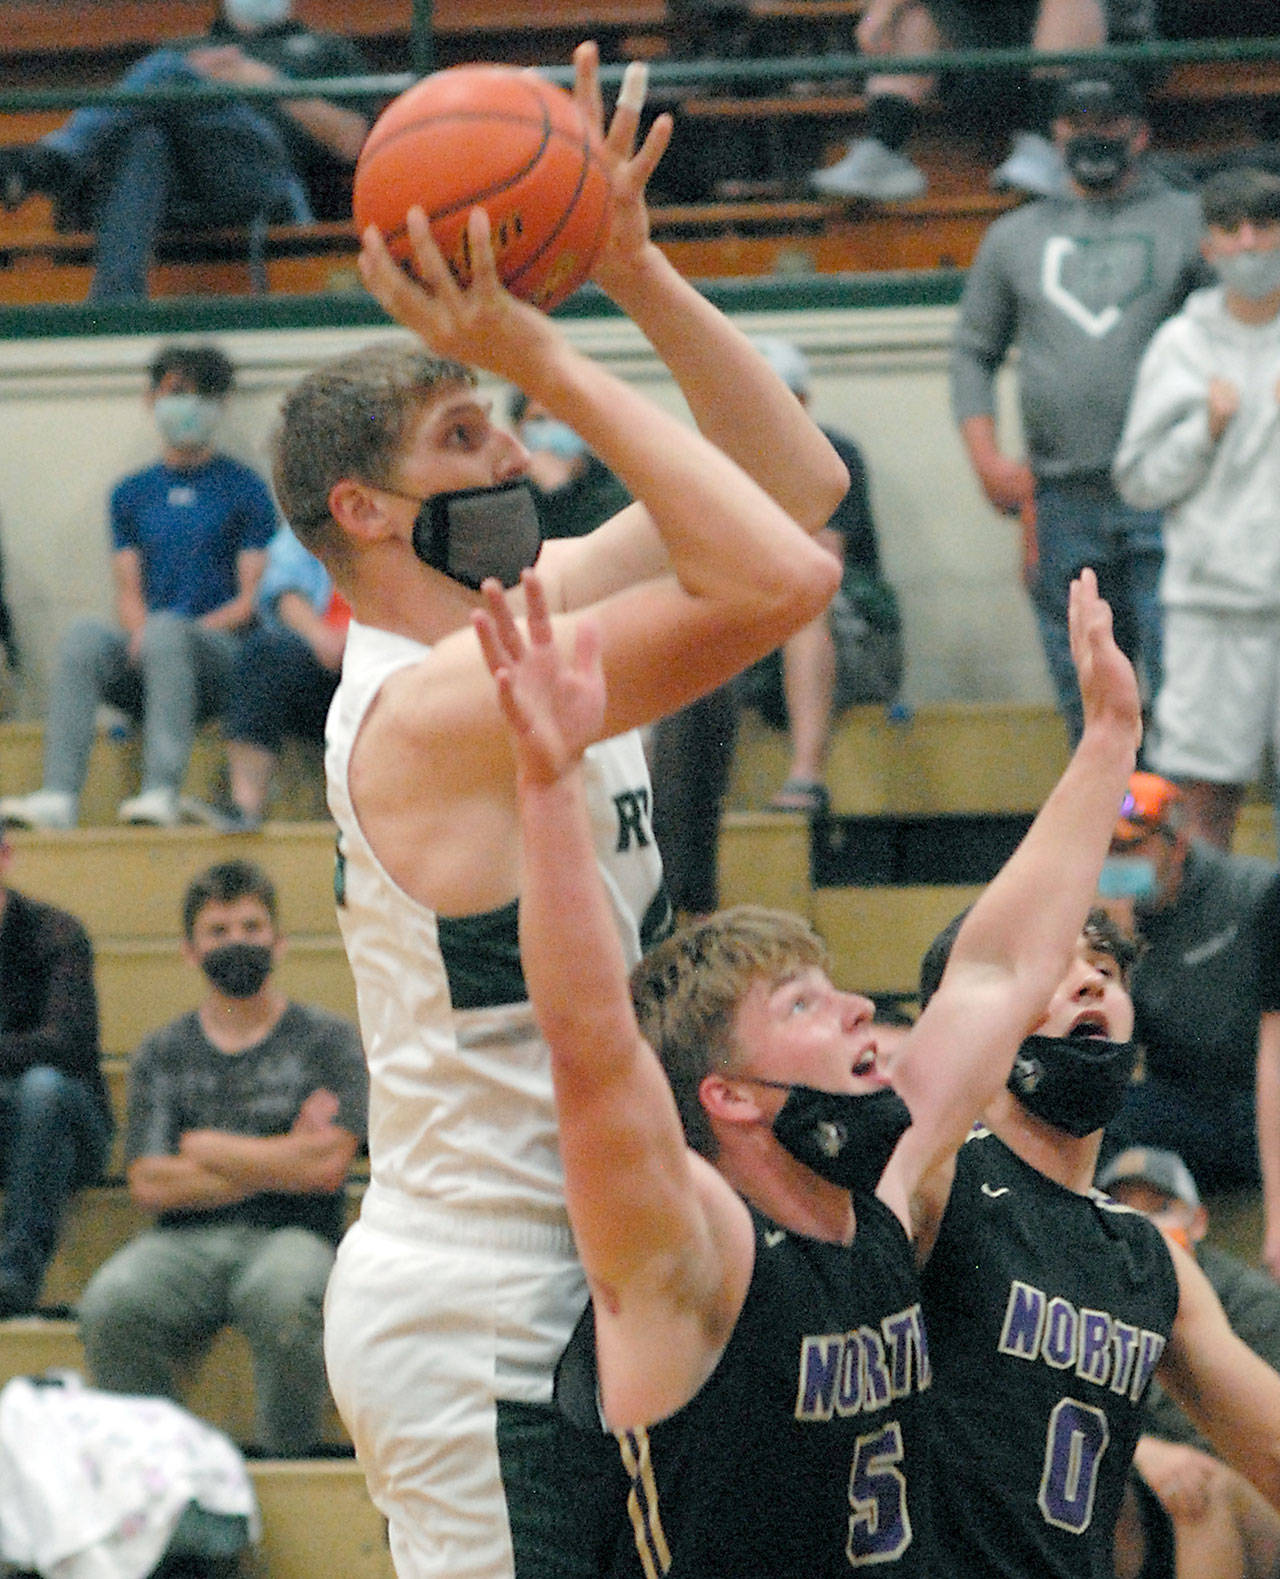 Keith Thorpe/Peninsula Daily News Port Angeles’ John Vaara aims for the basket over the heads on North Kitsap’s Colton Bower, front, and Johny Olmsted on Thursday at Port Angeles High School.